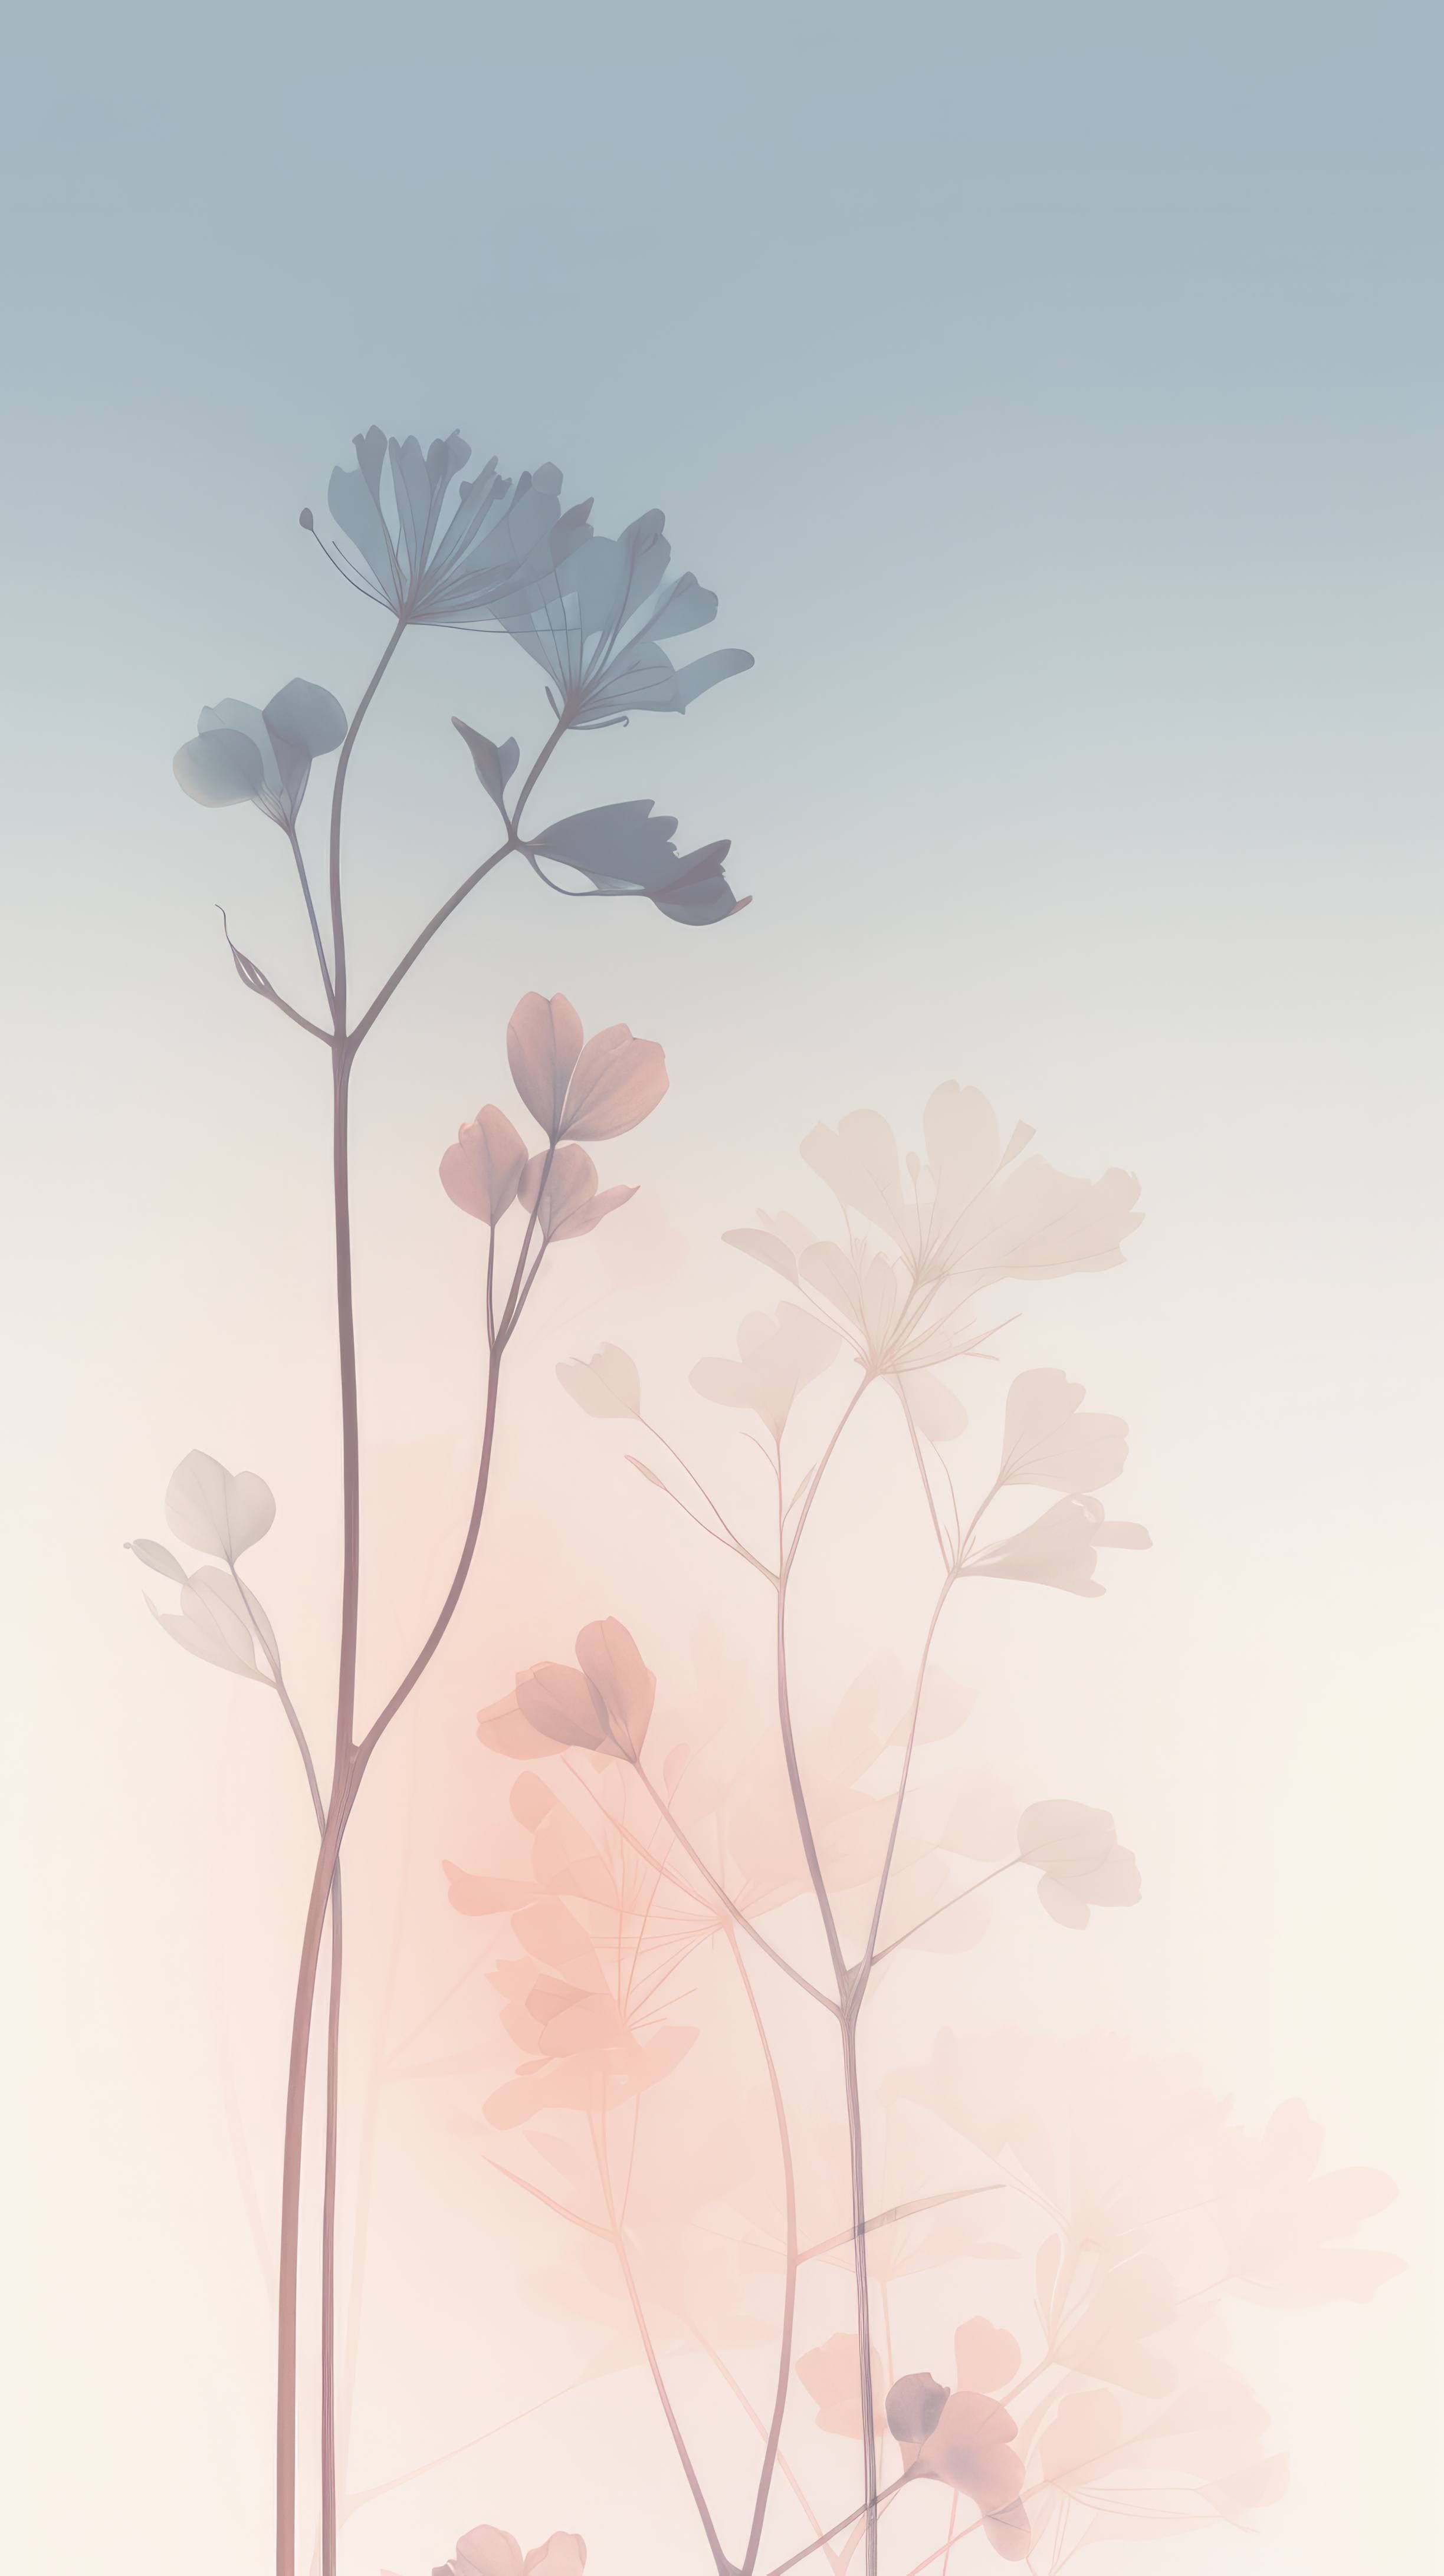 A soft and dreamy floral background image with a pastel color palette and a gradient effect. The image features a collection of delicate flowers and leaves in shades of blue, pink, and peach. - Pastel minimalist